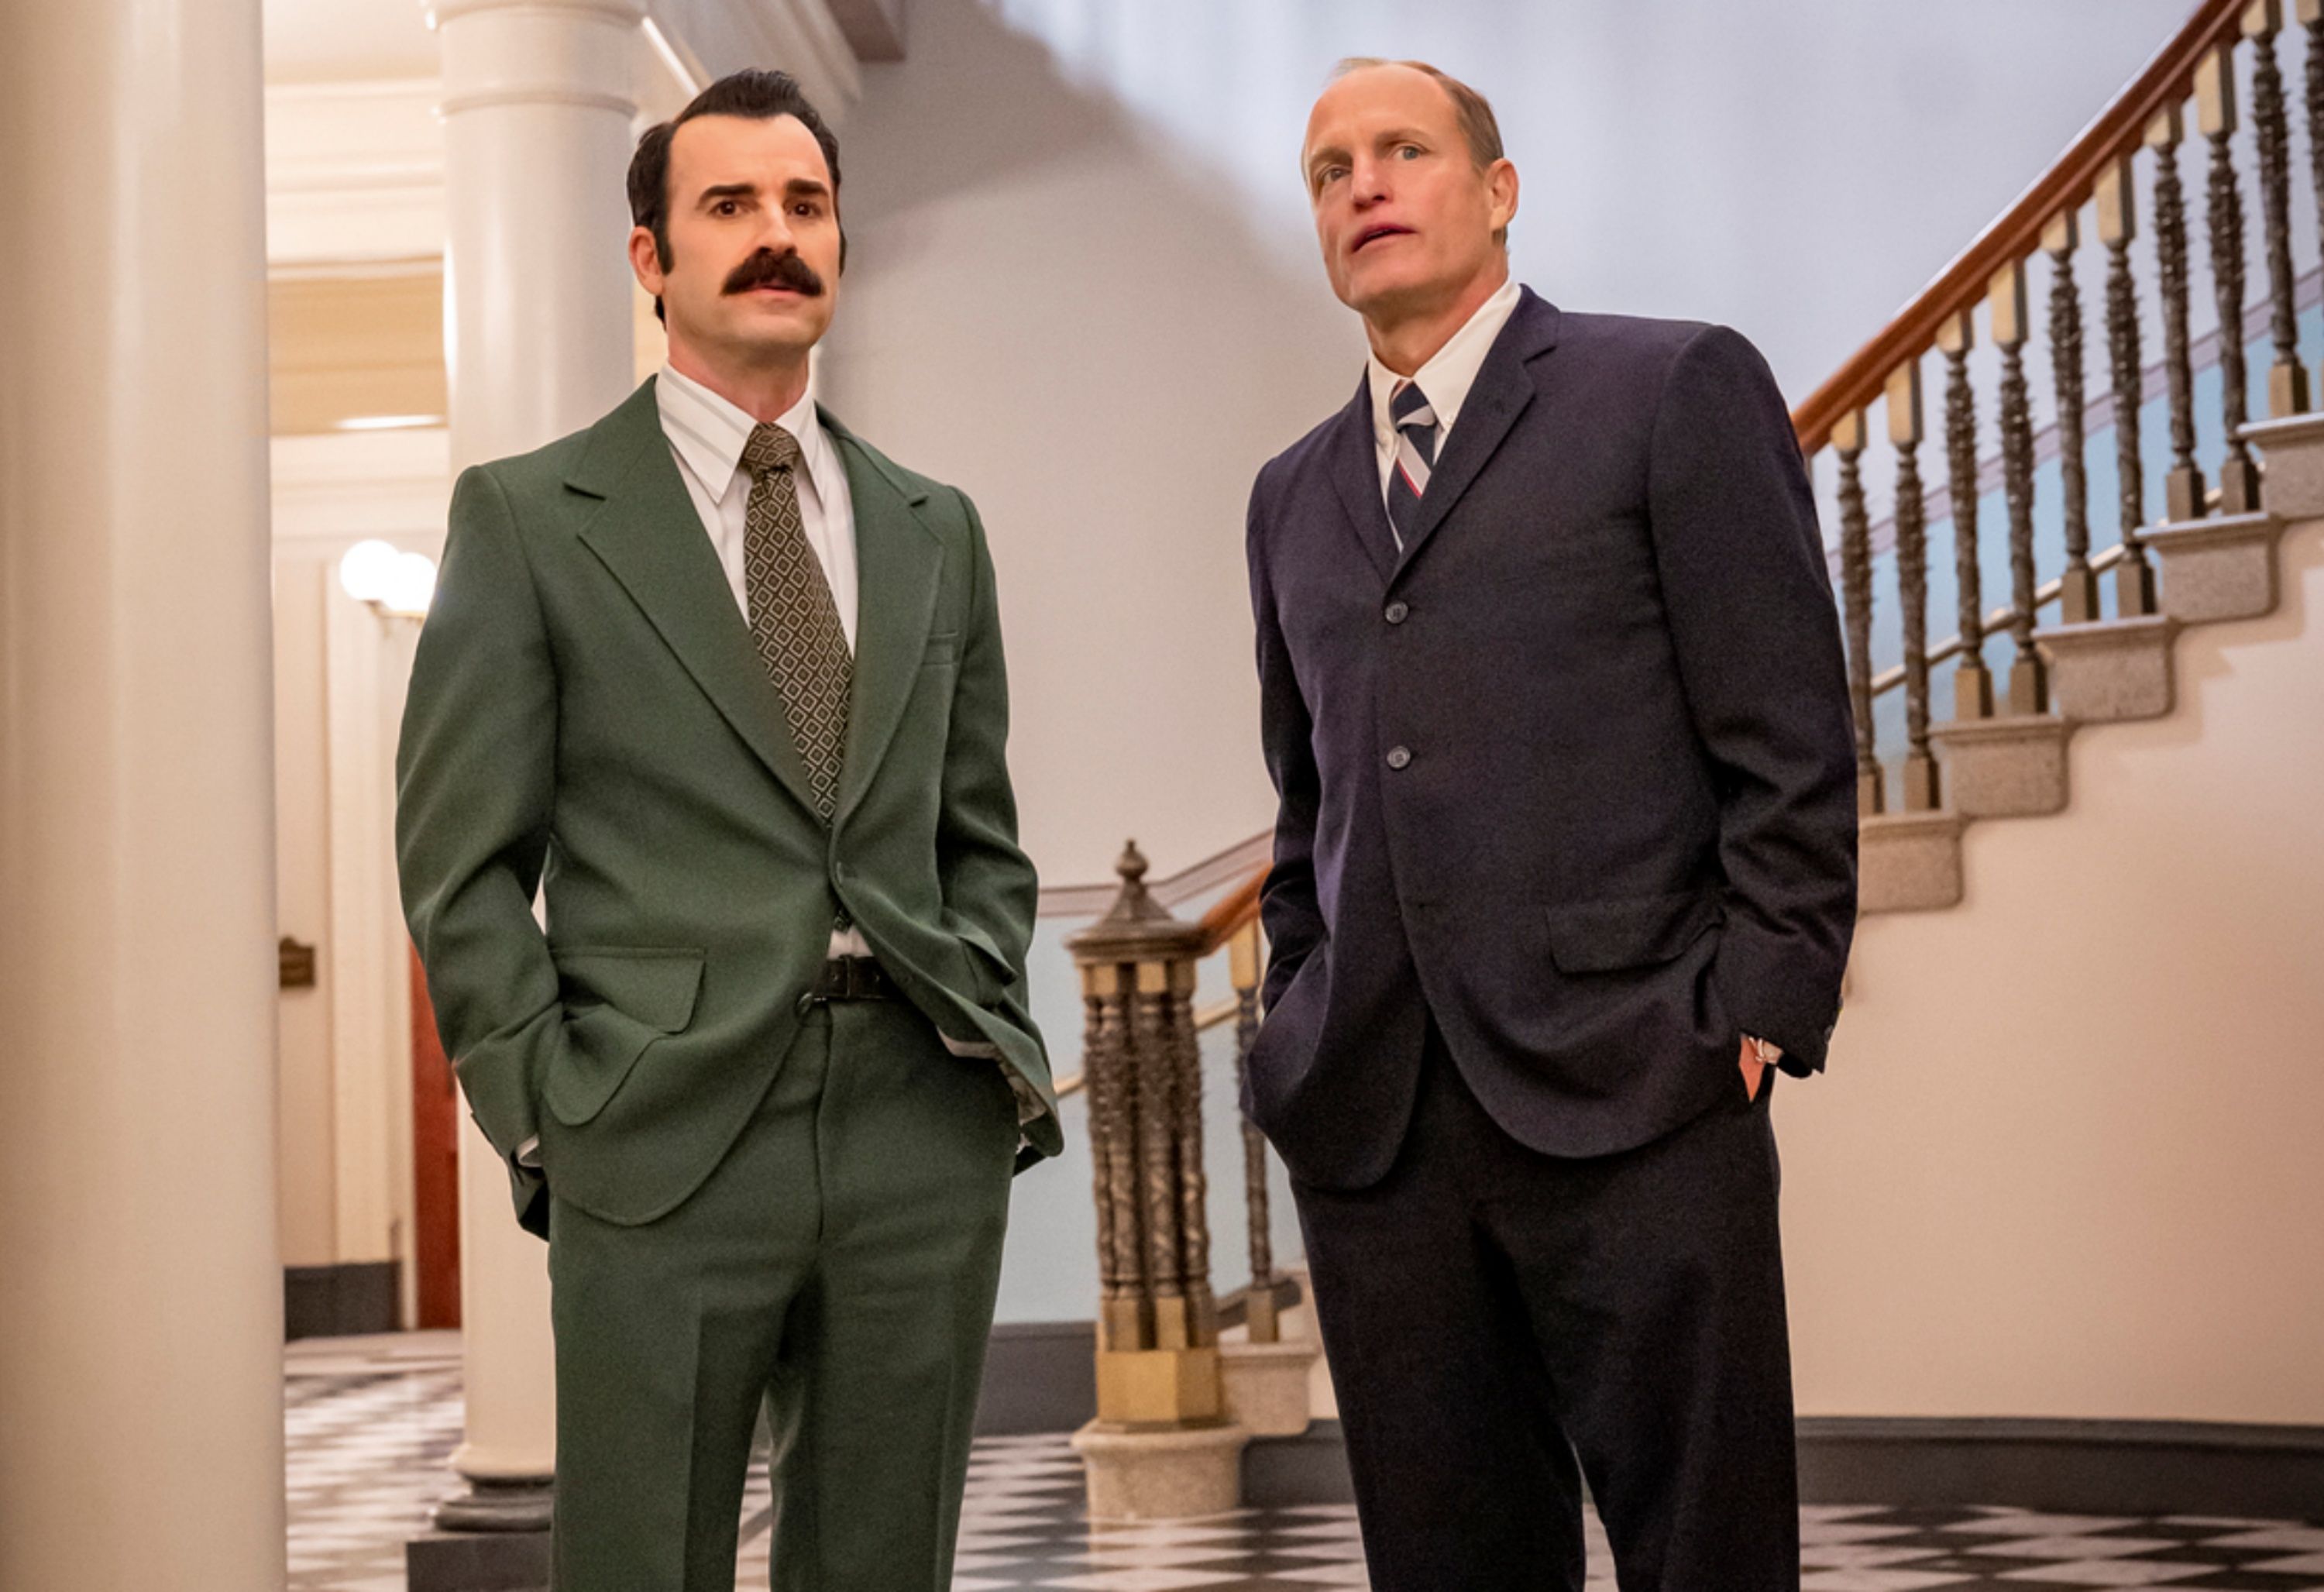 Woody Harrelson as E. Howard Hunt and Justin Theroux as G. Gordon Liddy in White House Plumbers